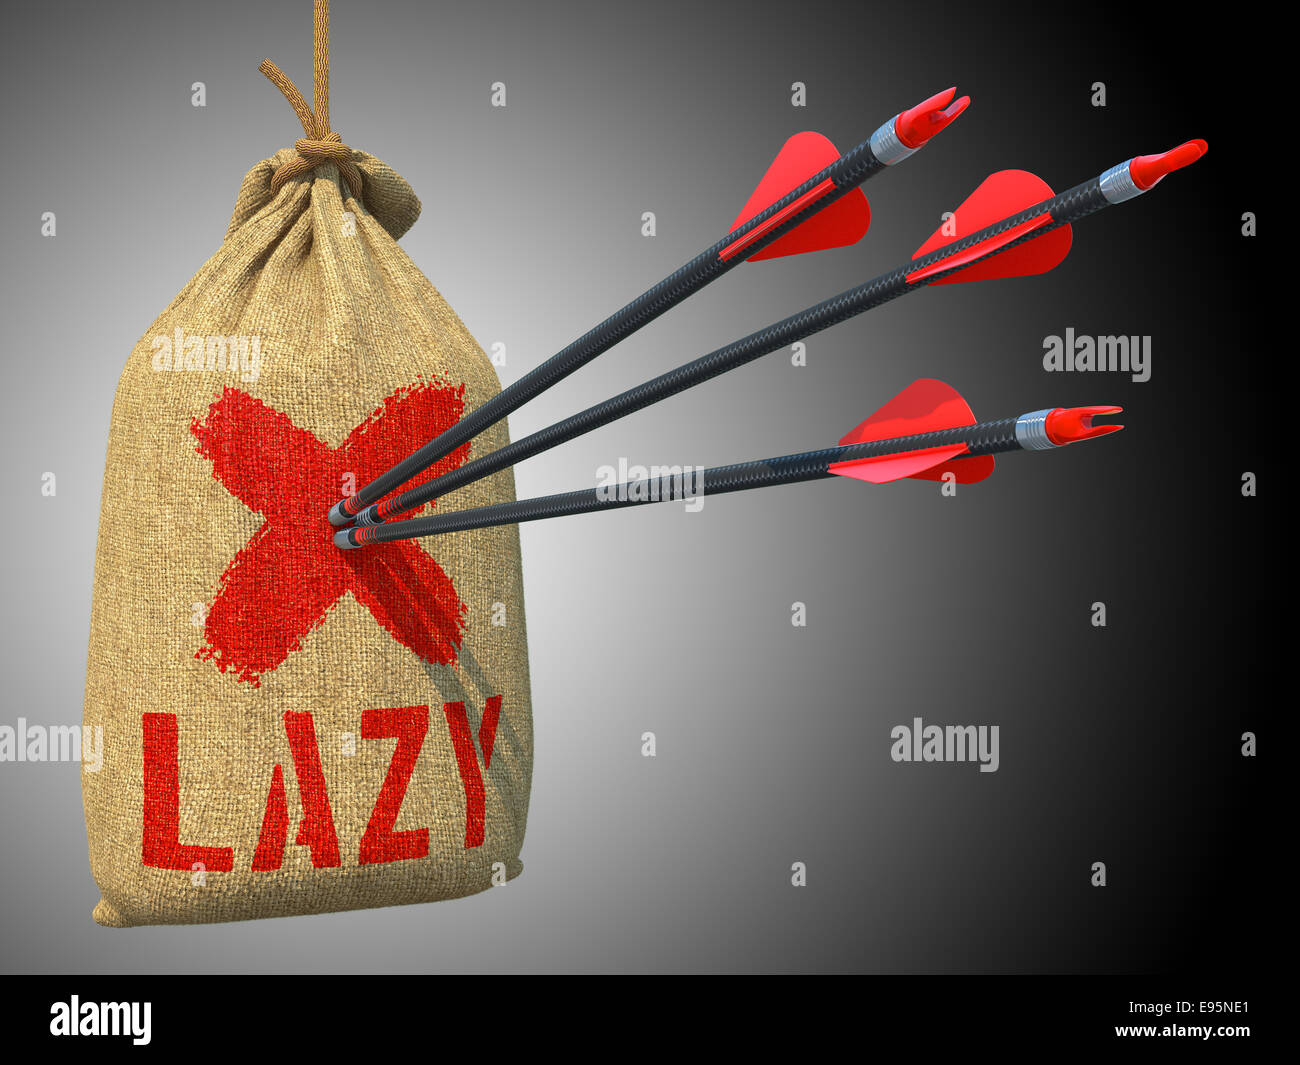 Lazy - Arrows Hit in Red Mark Target. Stock Photo